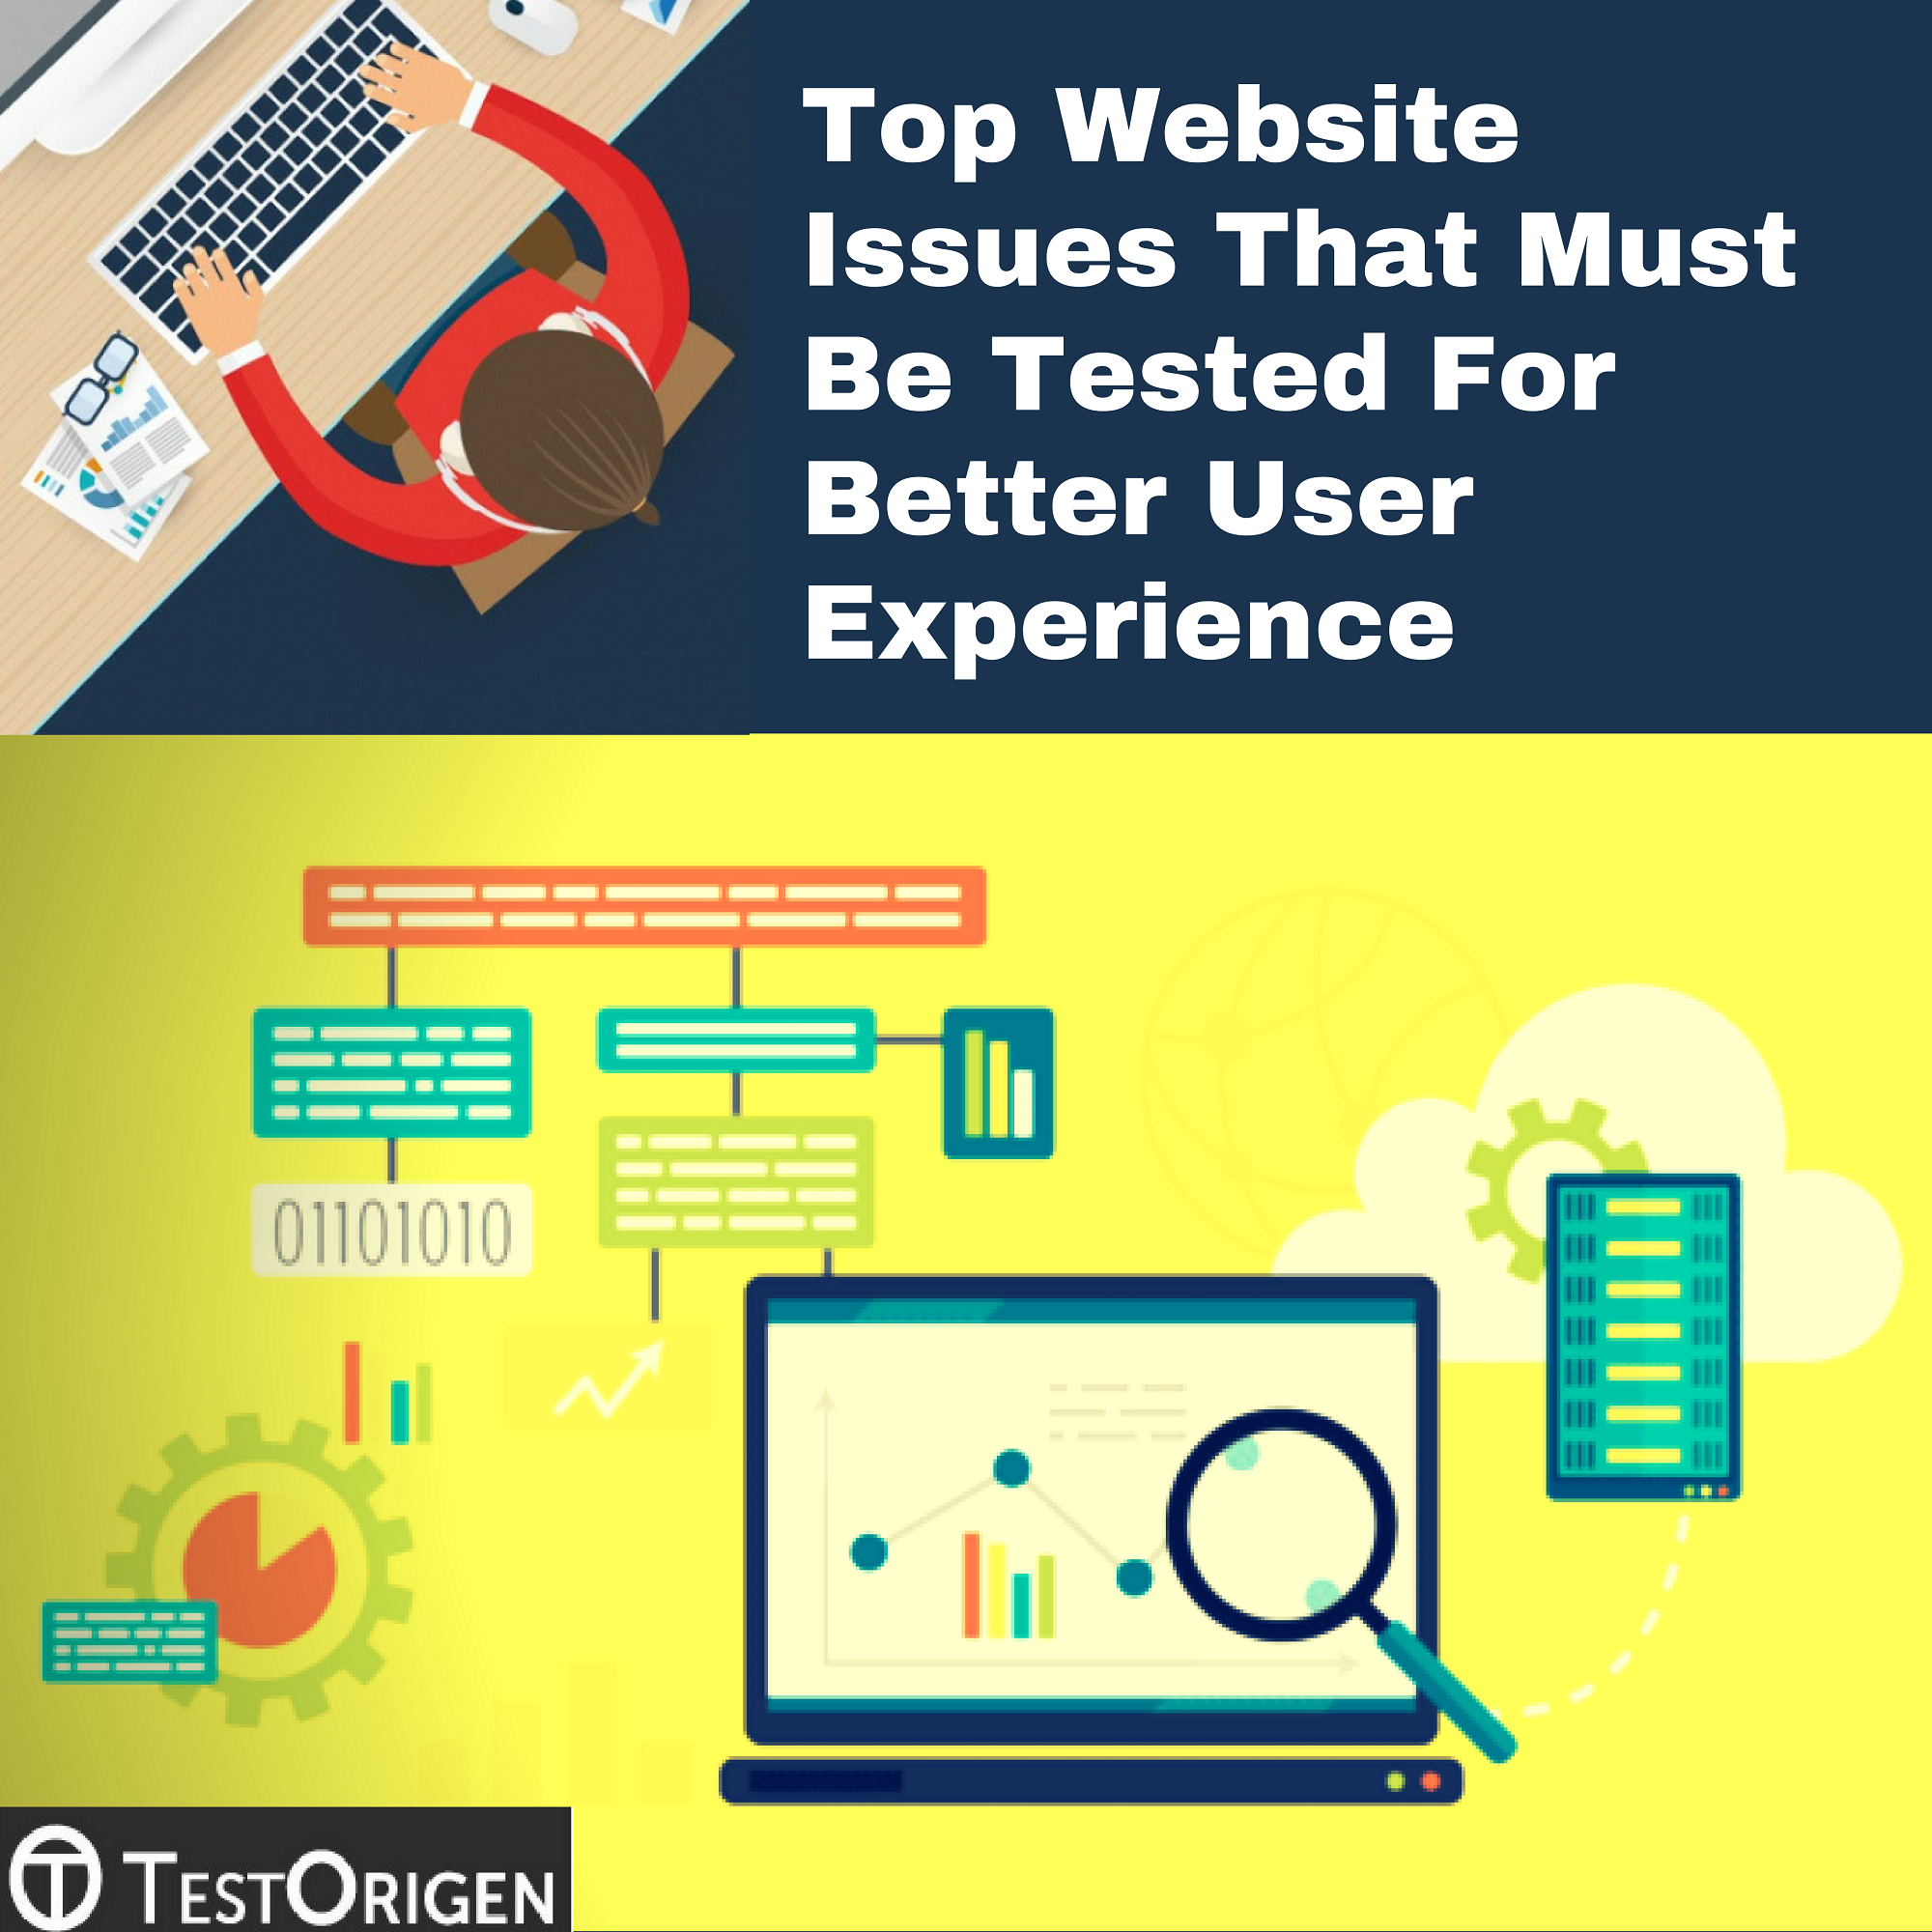 Top Website Issues That Must Be Tested For Better User Experience